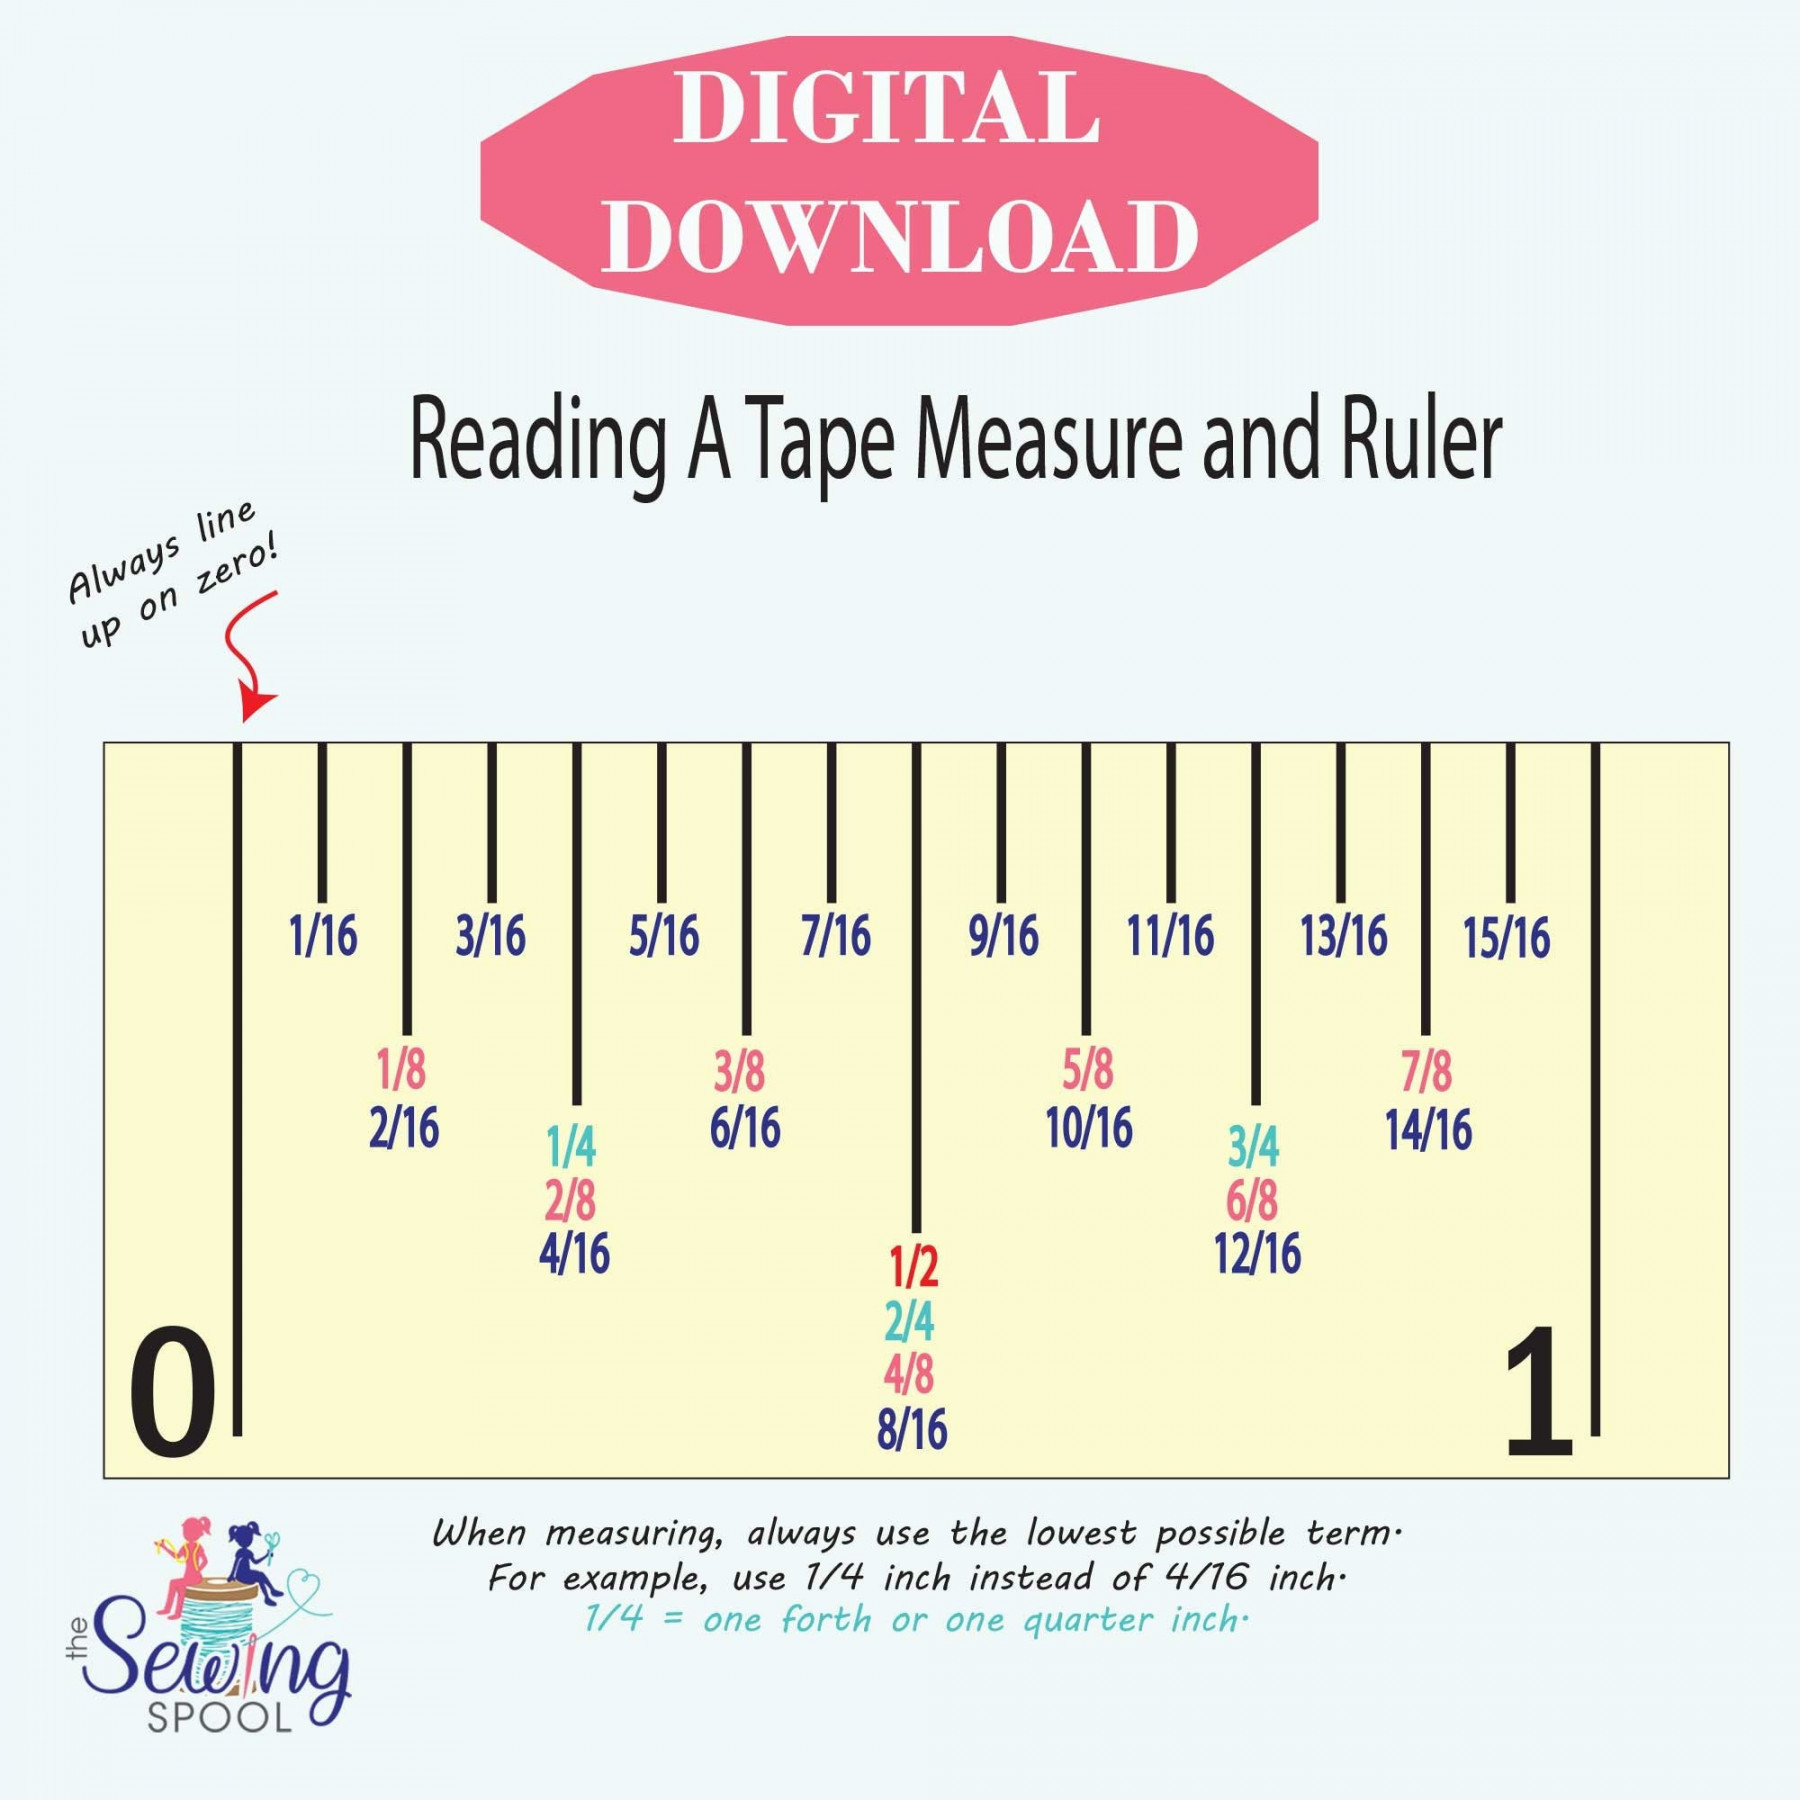 Reading a Tape Measure and Ruler PDF DIGITAL DOWNLOAD - Etsy